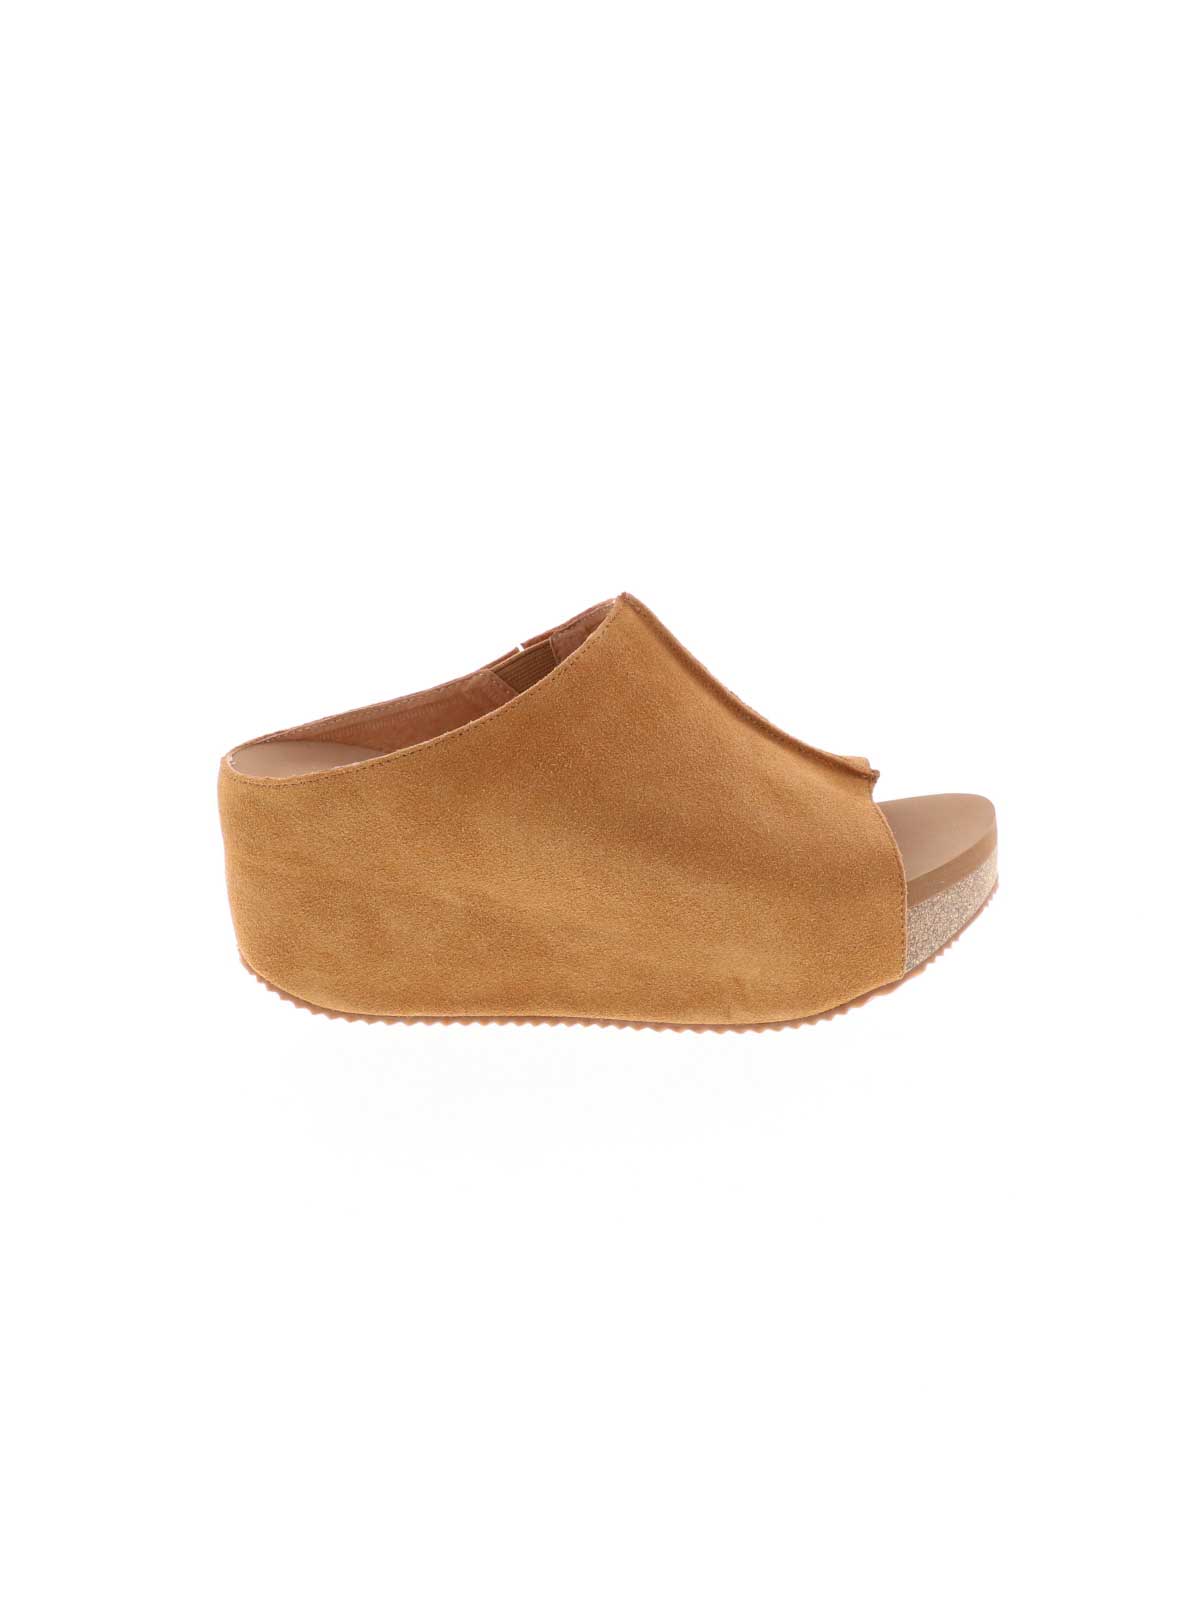 SLIP ON PEEP TOE WEDGE - Suede, hair calf, metallic tonal camo, faux snake upper with butted center seam and inner elastic gore for perfect fit - Slip on design - Leather lining - Signature ultra comfort EVA insole - Rubber traction outsole - Approx. 0.75" platform height - Approx. 2.75" wedge heel height tan